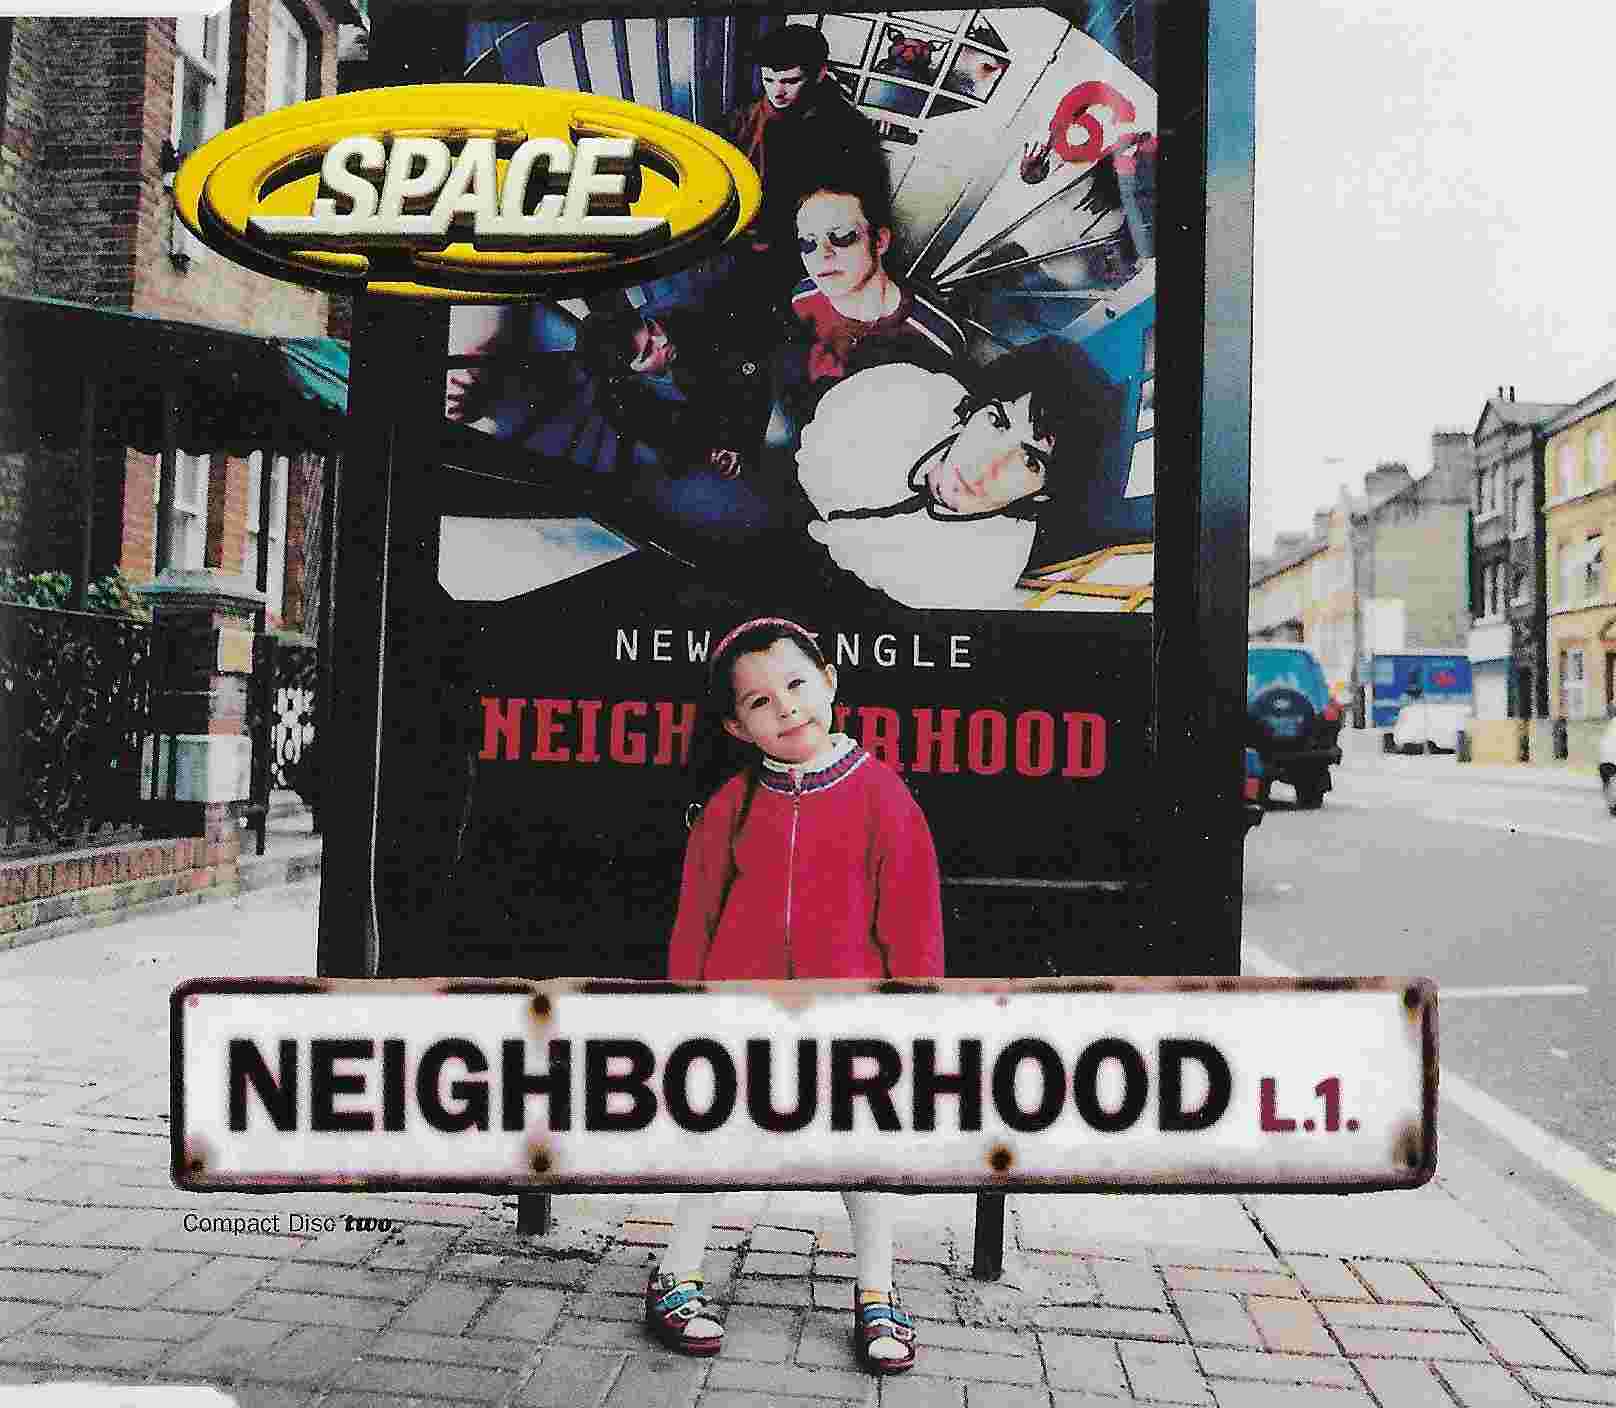 Picture of Neighbourhood by artist Space  